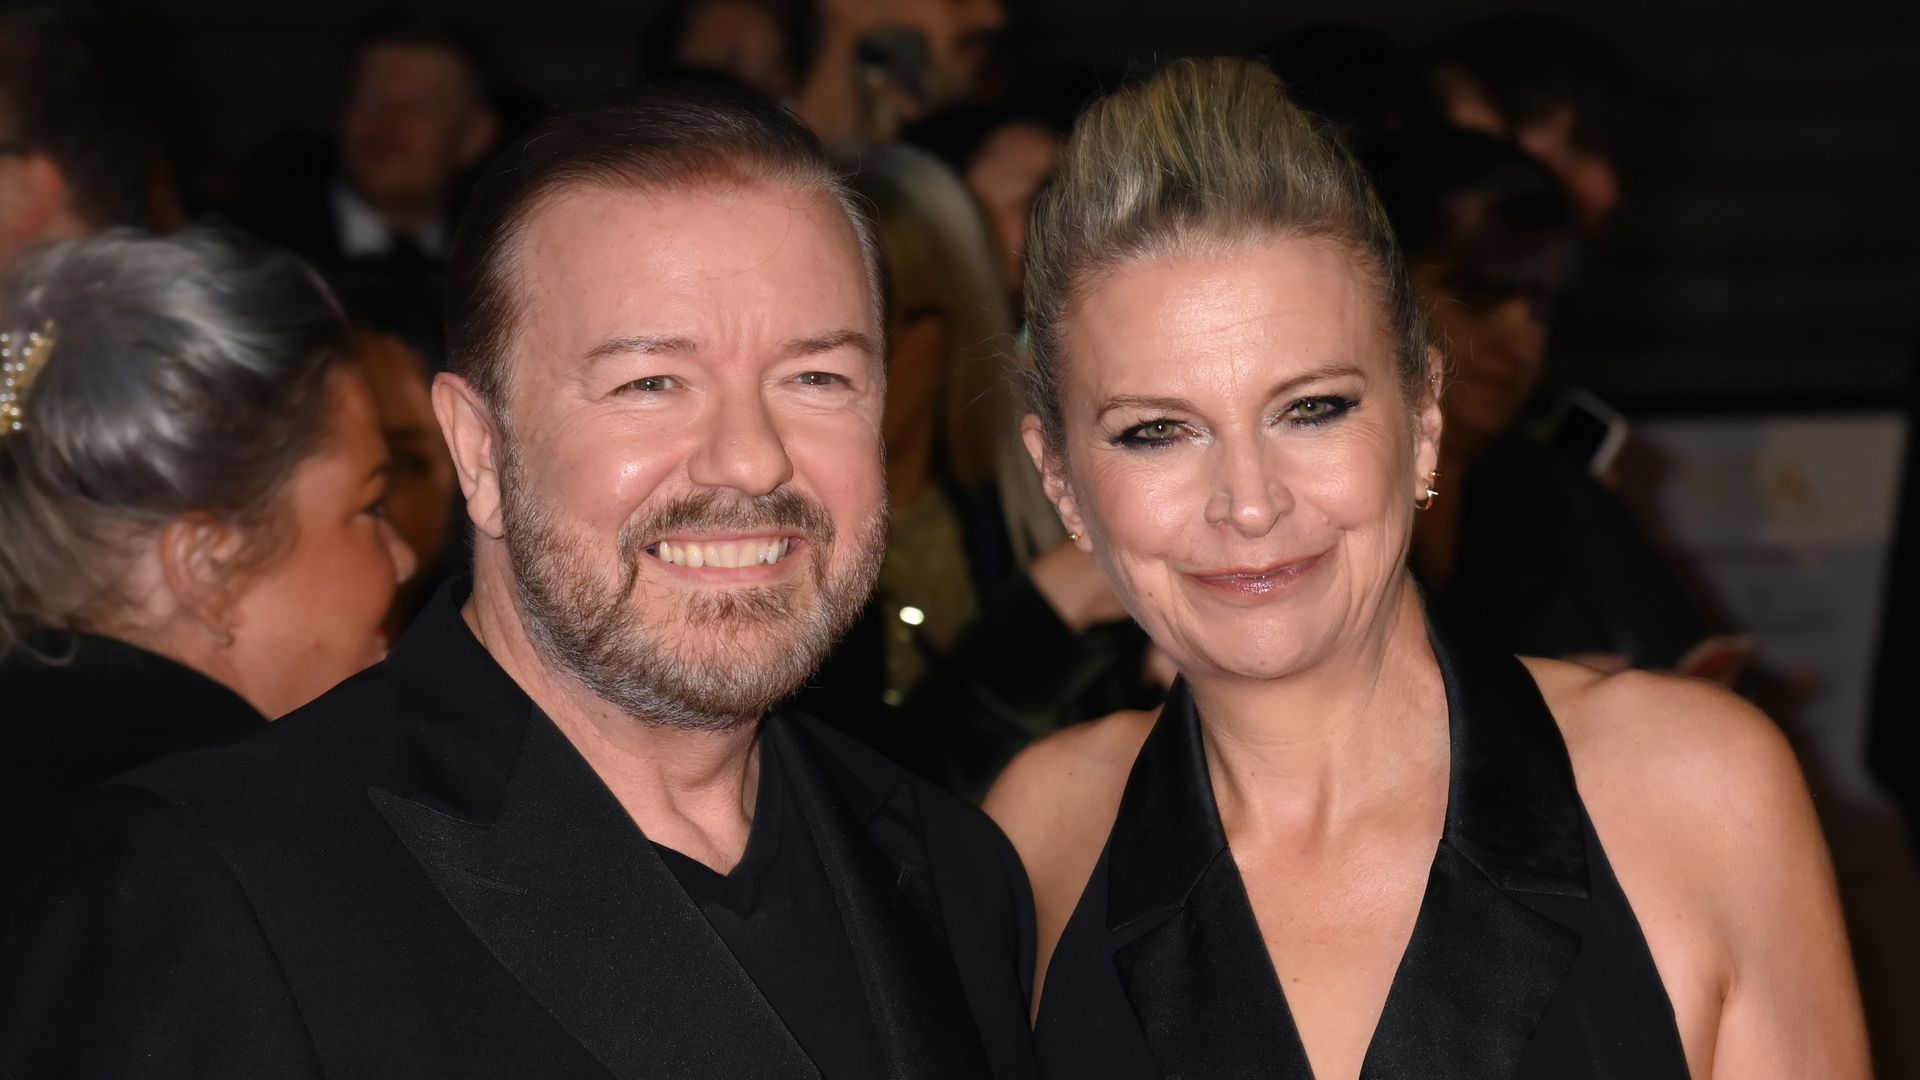 Ricky Gervais' spectacular £10.8m London home with partner Jane Fallon is surprisingly traditional